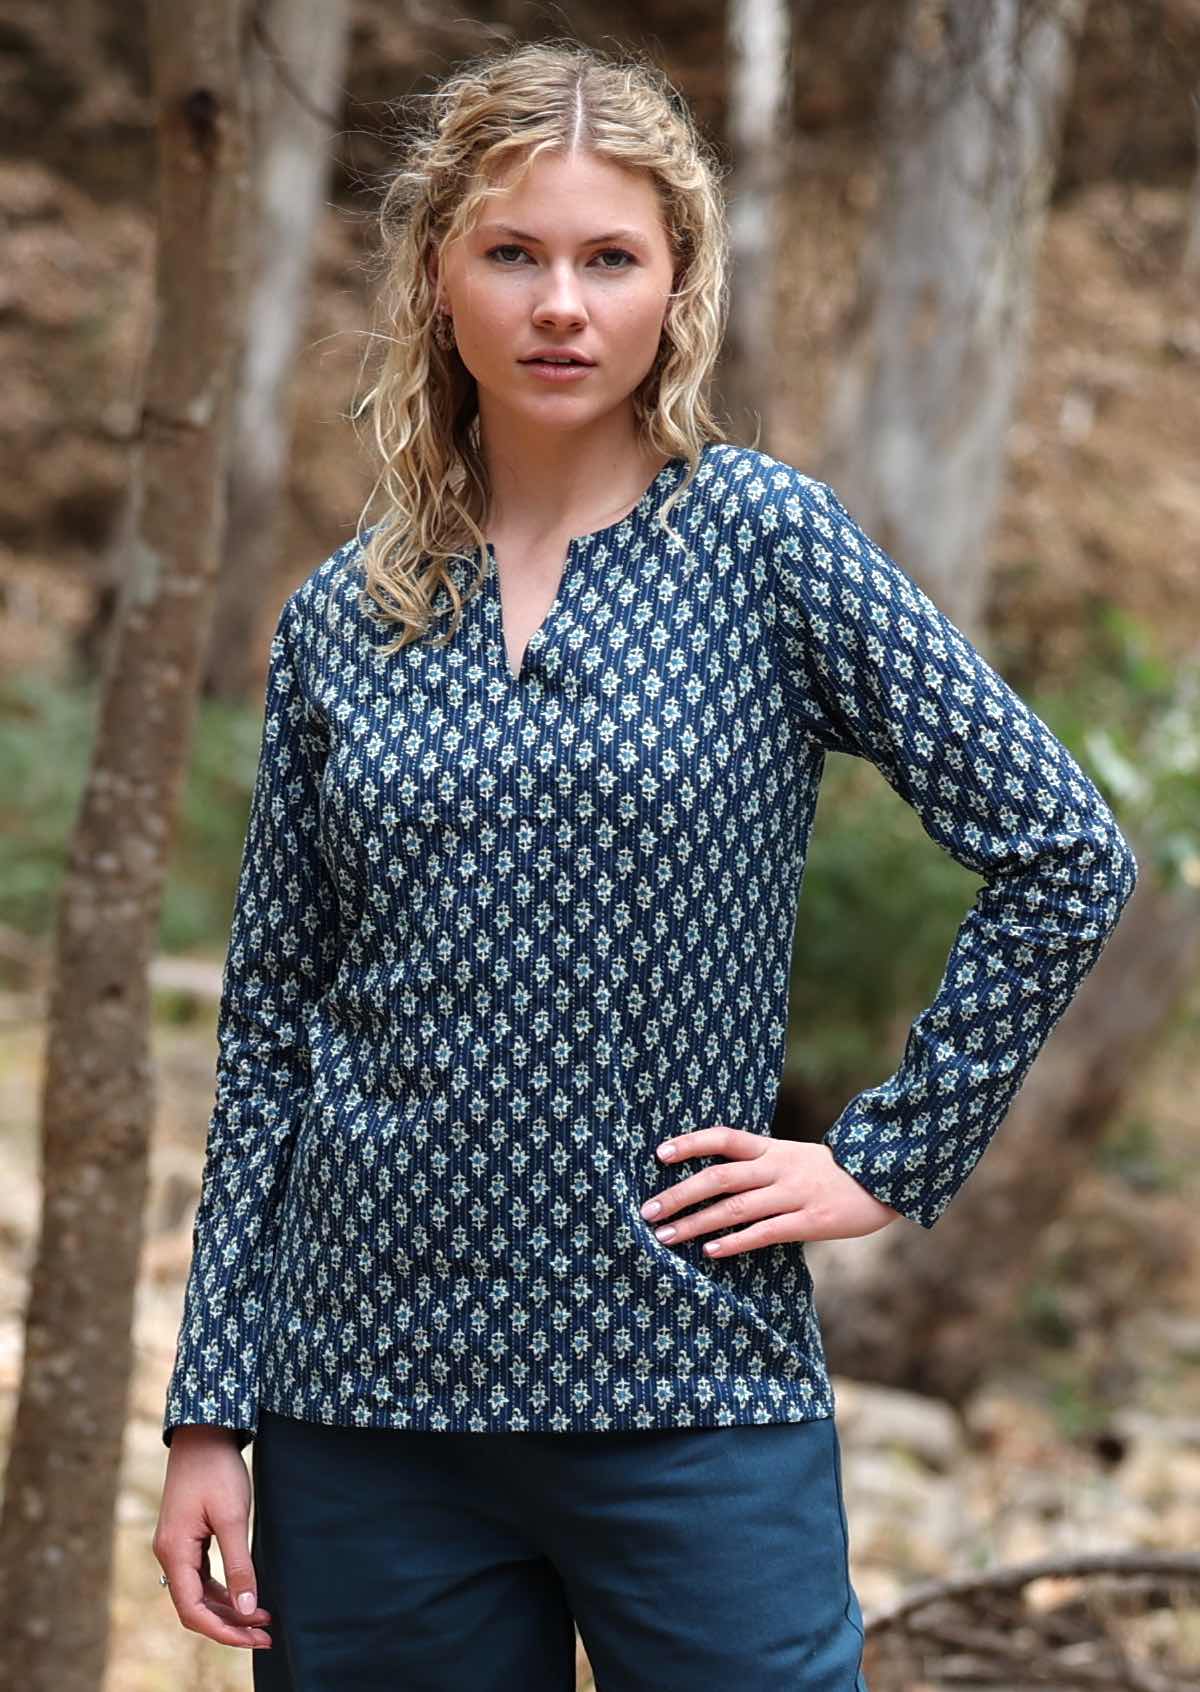 Lightweight cotton long sleeve top with cutout in neckline